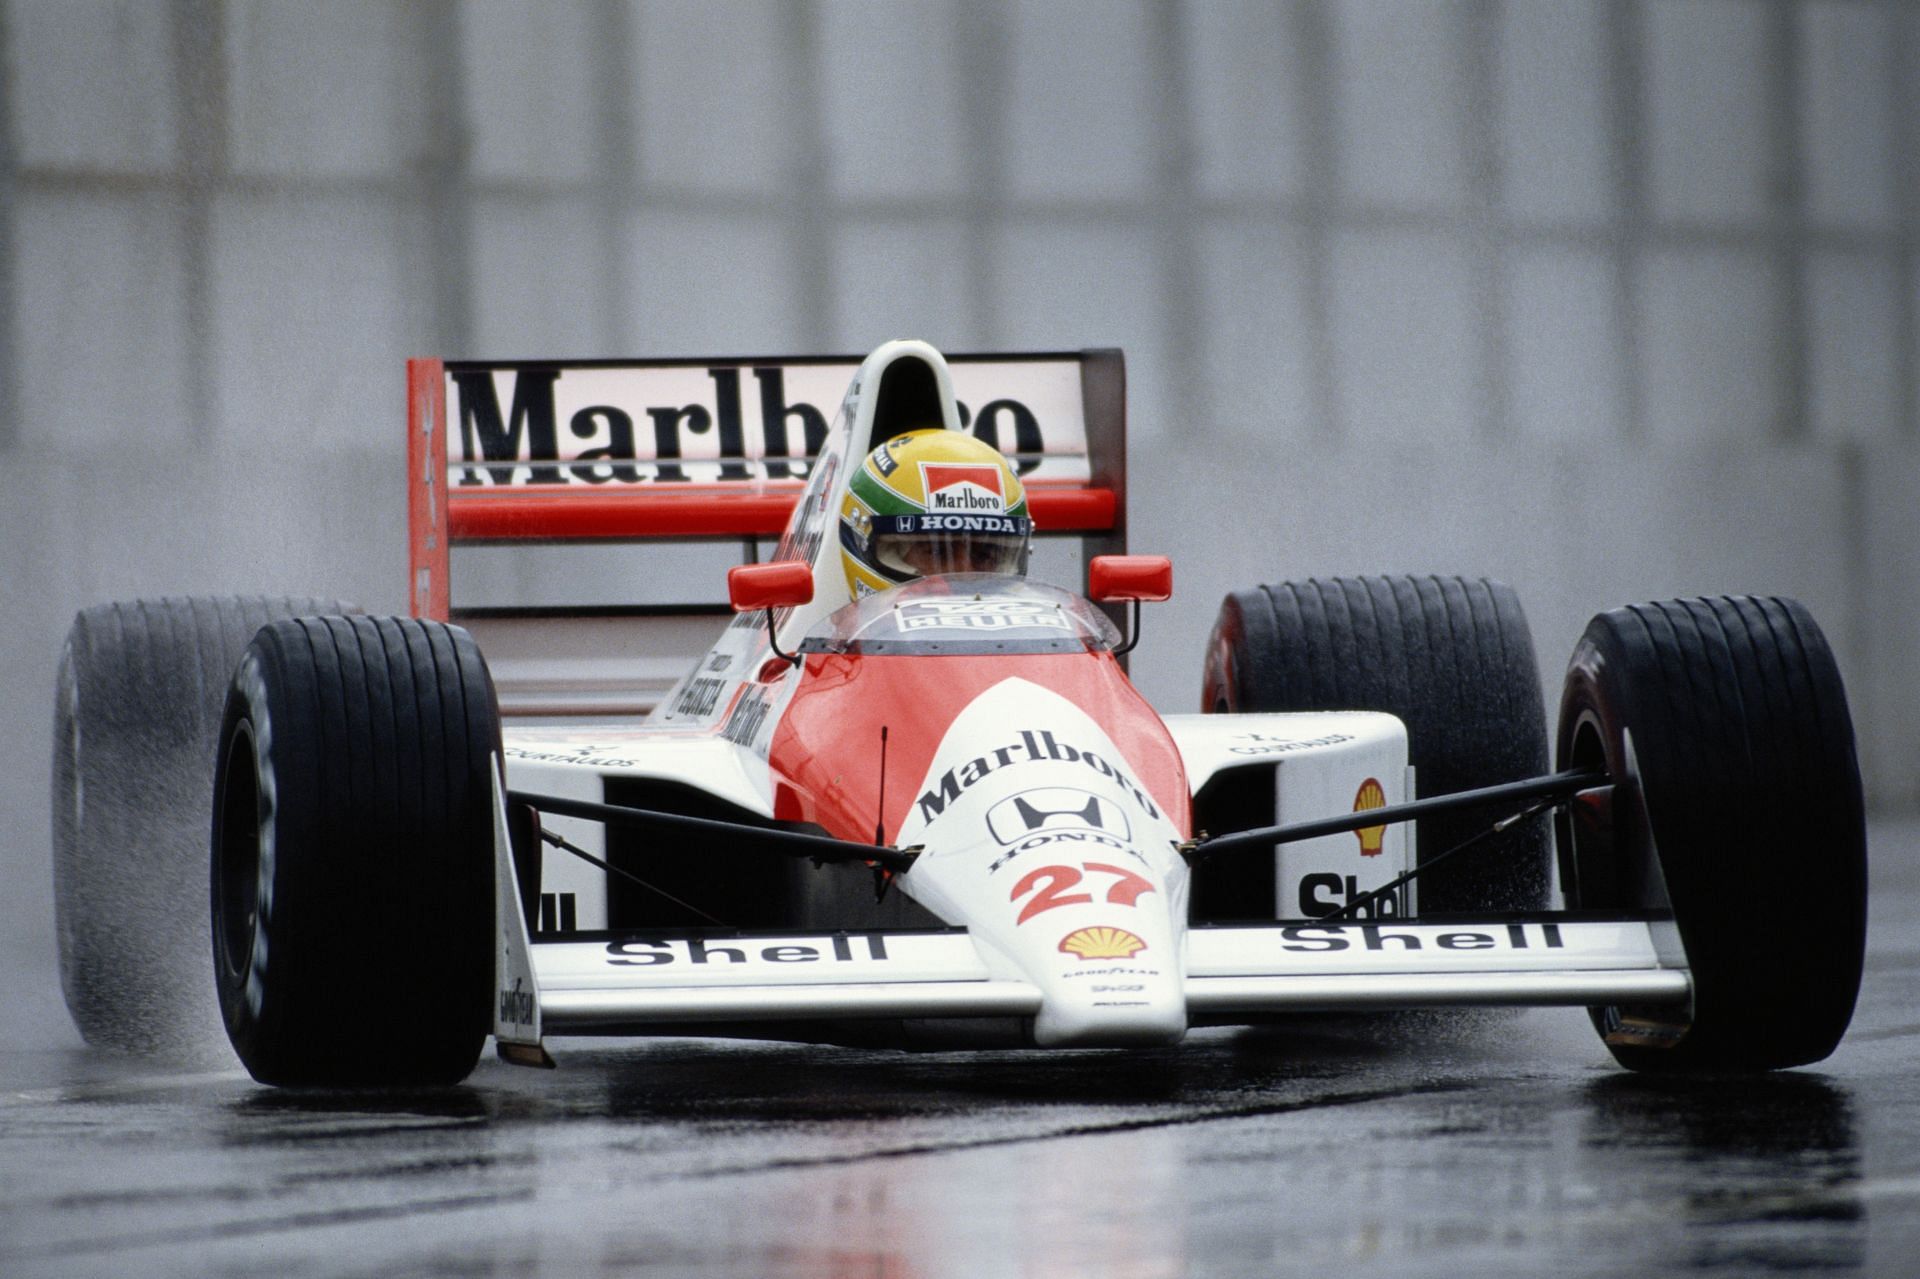 Senna made the red and white liveried McLaren legendary (Photo by Pascal Randeau/Getty Images)